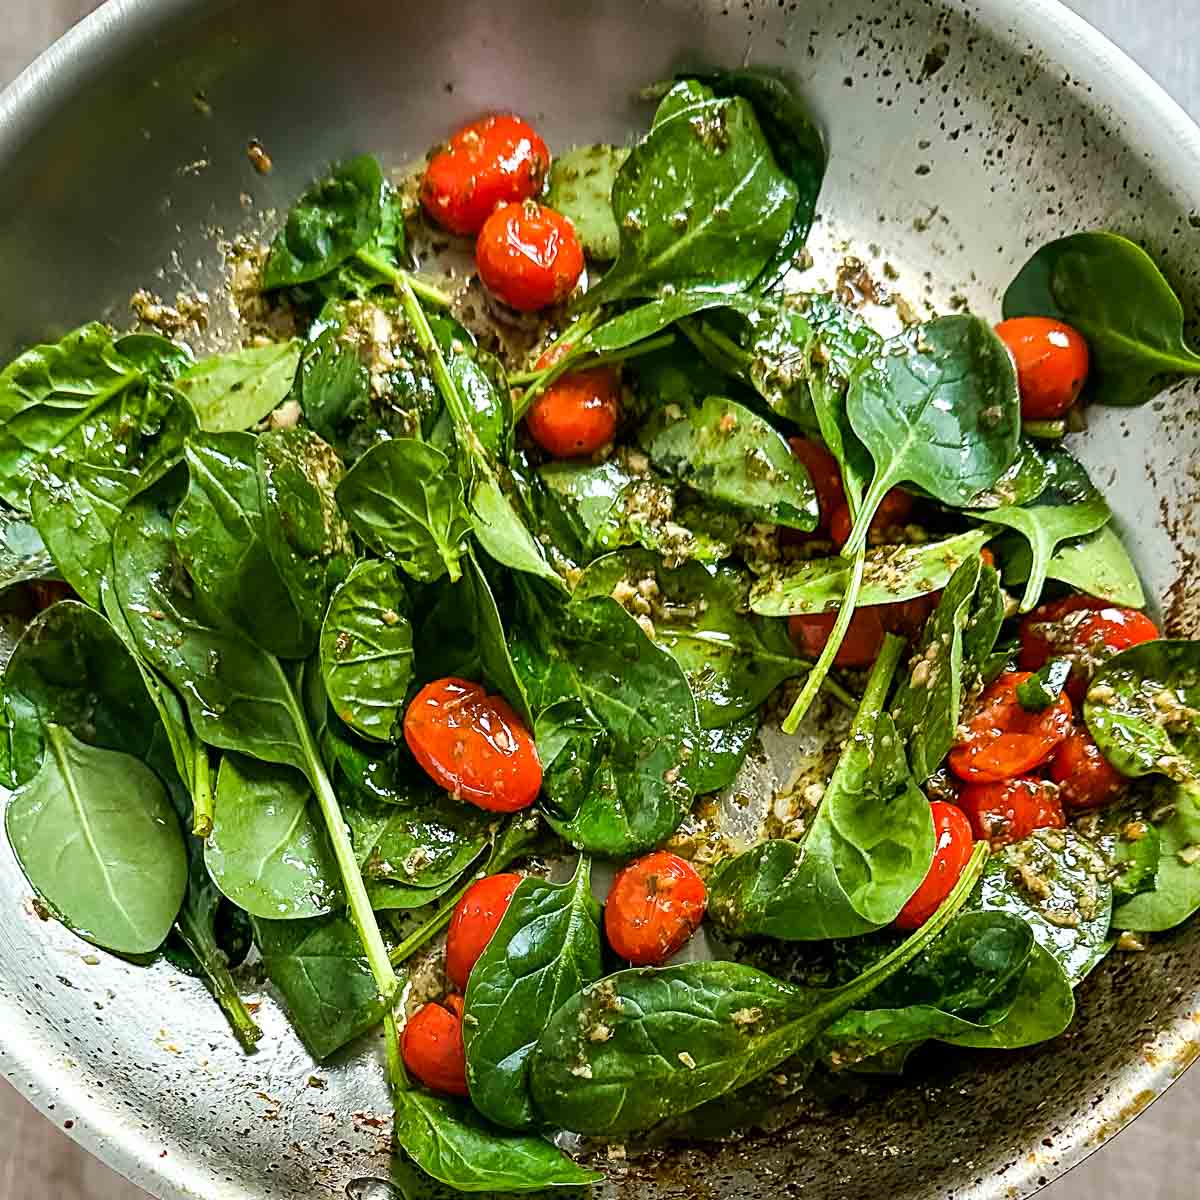 Spinach and tuna is mixed in with tomatoes, pesto, garlic, and olive oil in a pan.